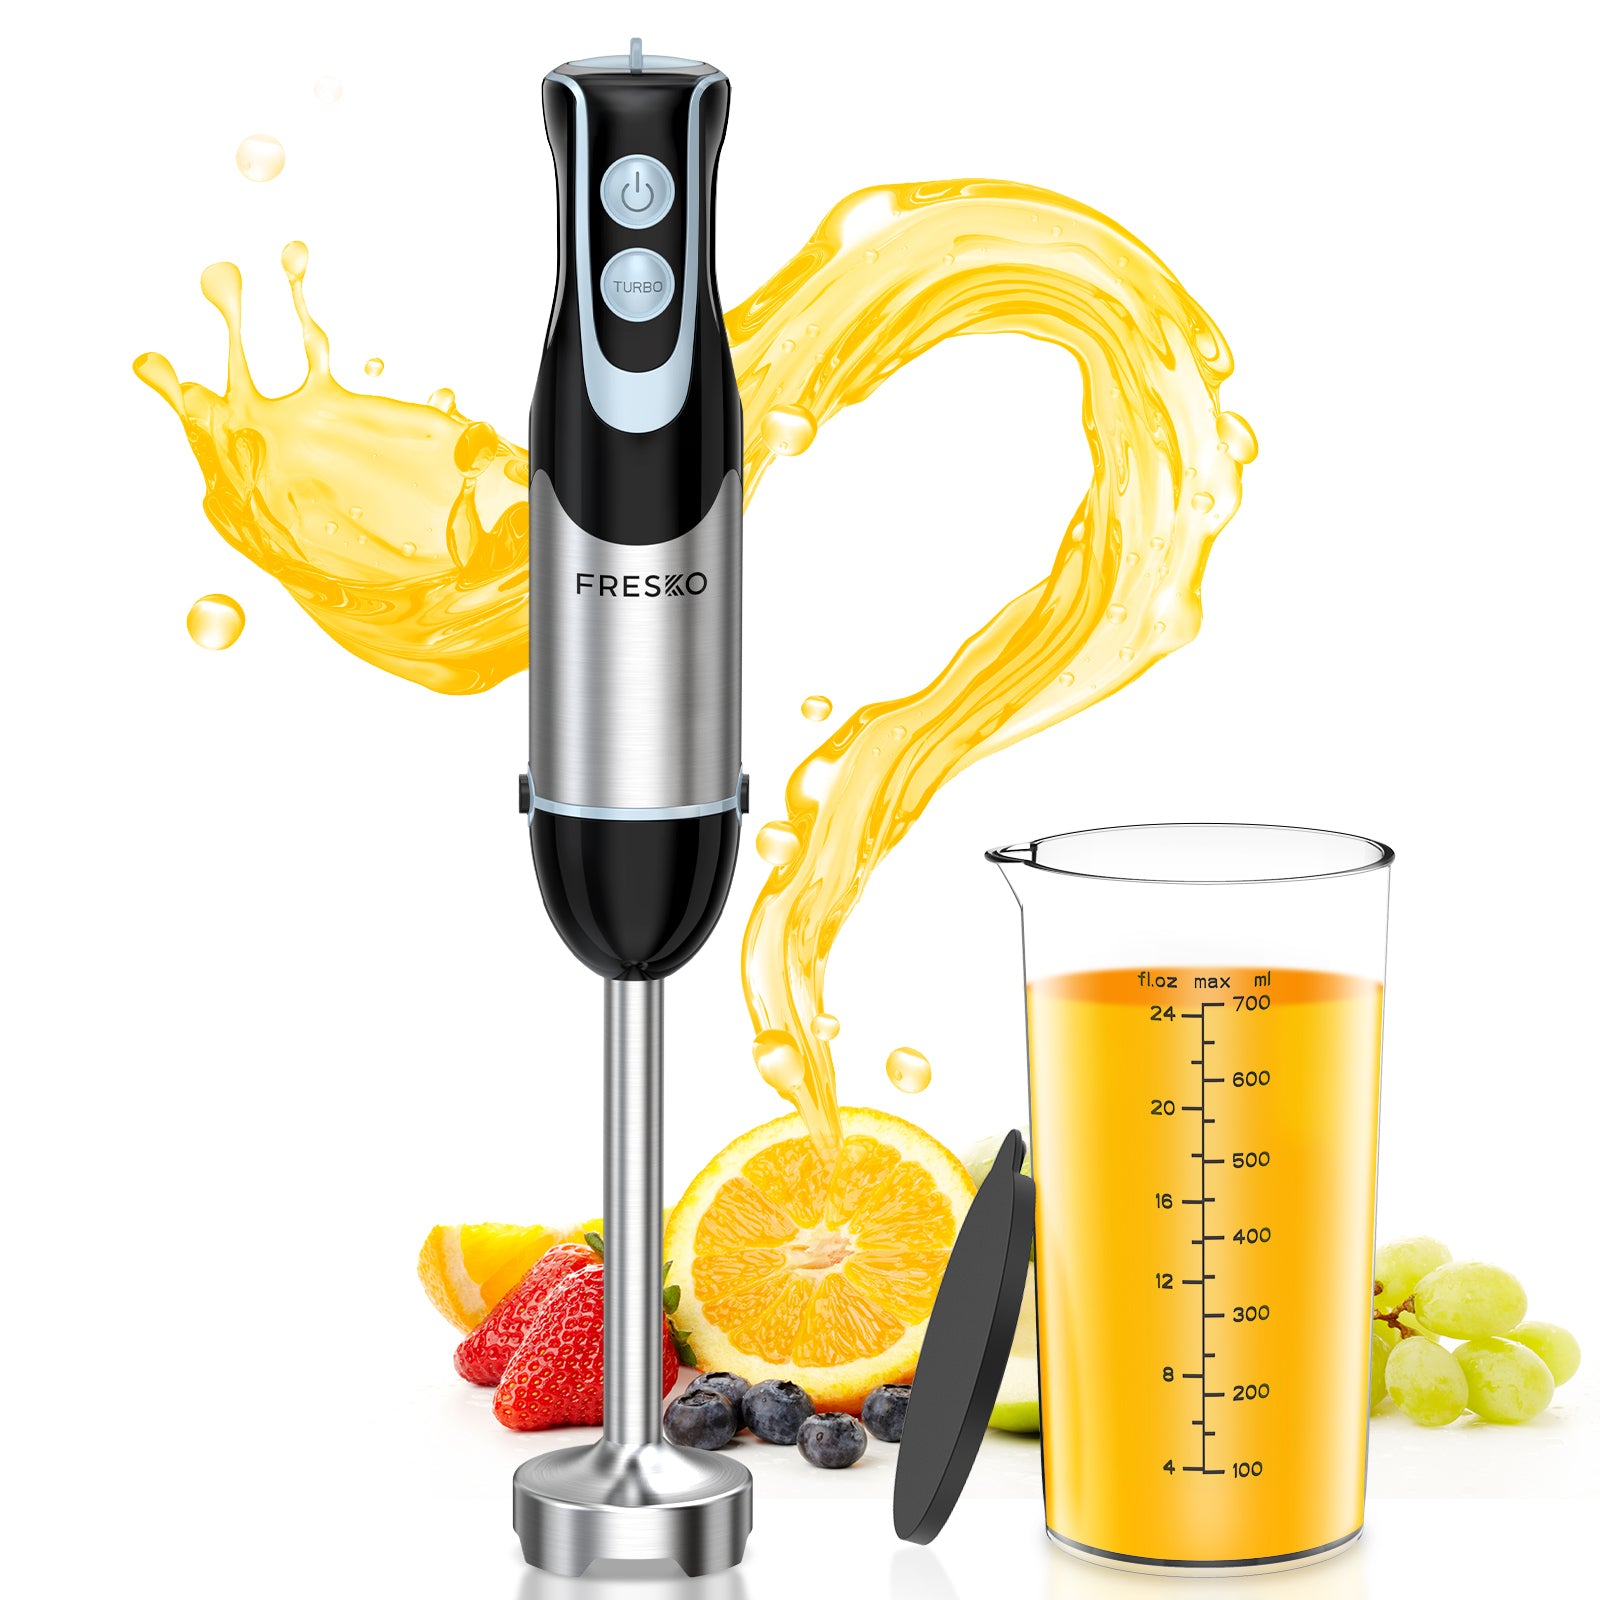  FRESKO Immersion Hand Blender 4-in-1, 500W Powerful Stainless  Steel Emulsion Blender Handheld with 12-Speeds & Turbo Mode, Includes  Measuring Cup, Chopper & Whisk, Ideal for Blending Soups & Smoothies: Home 